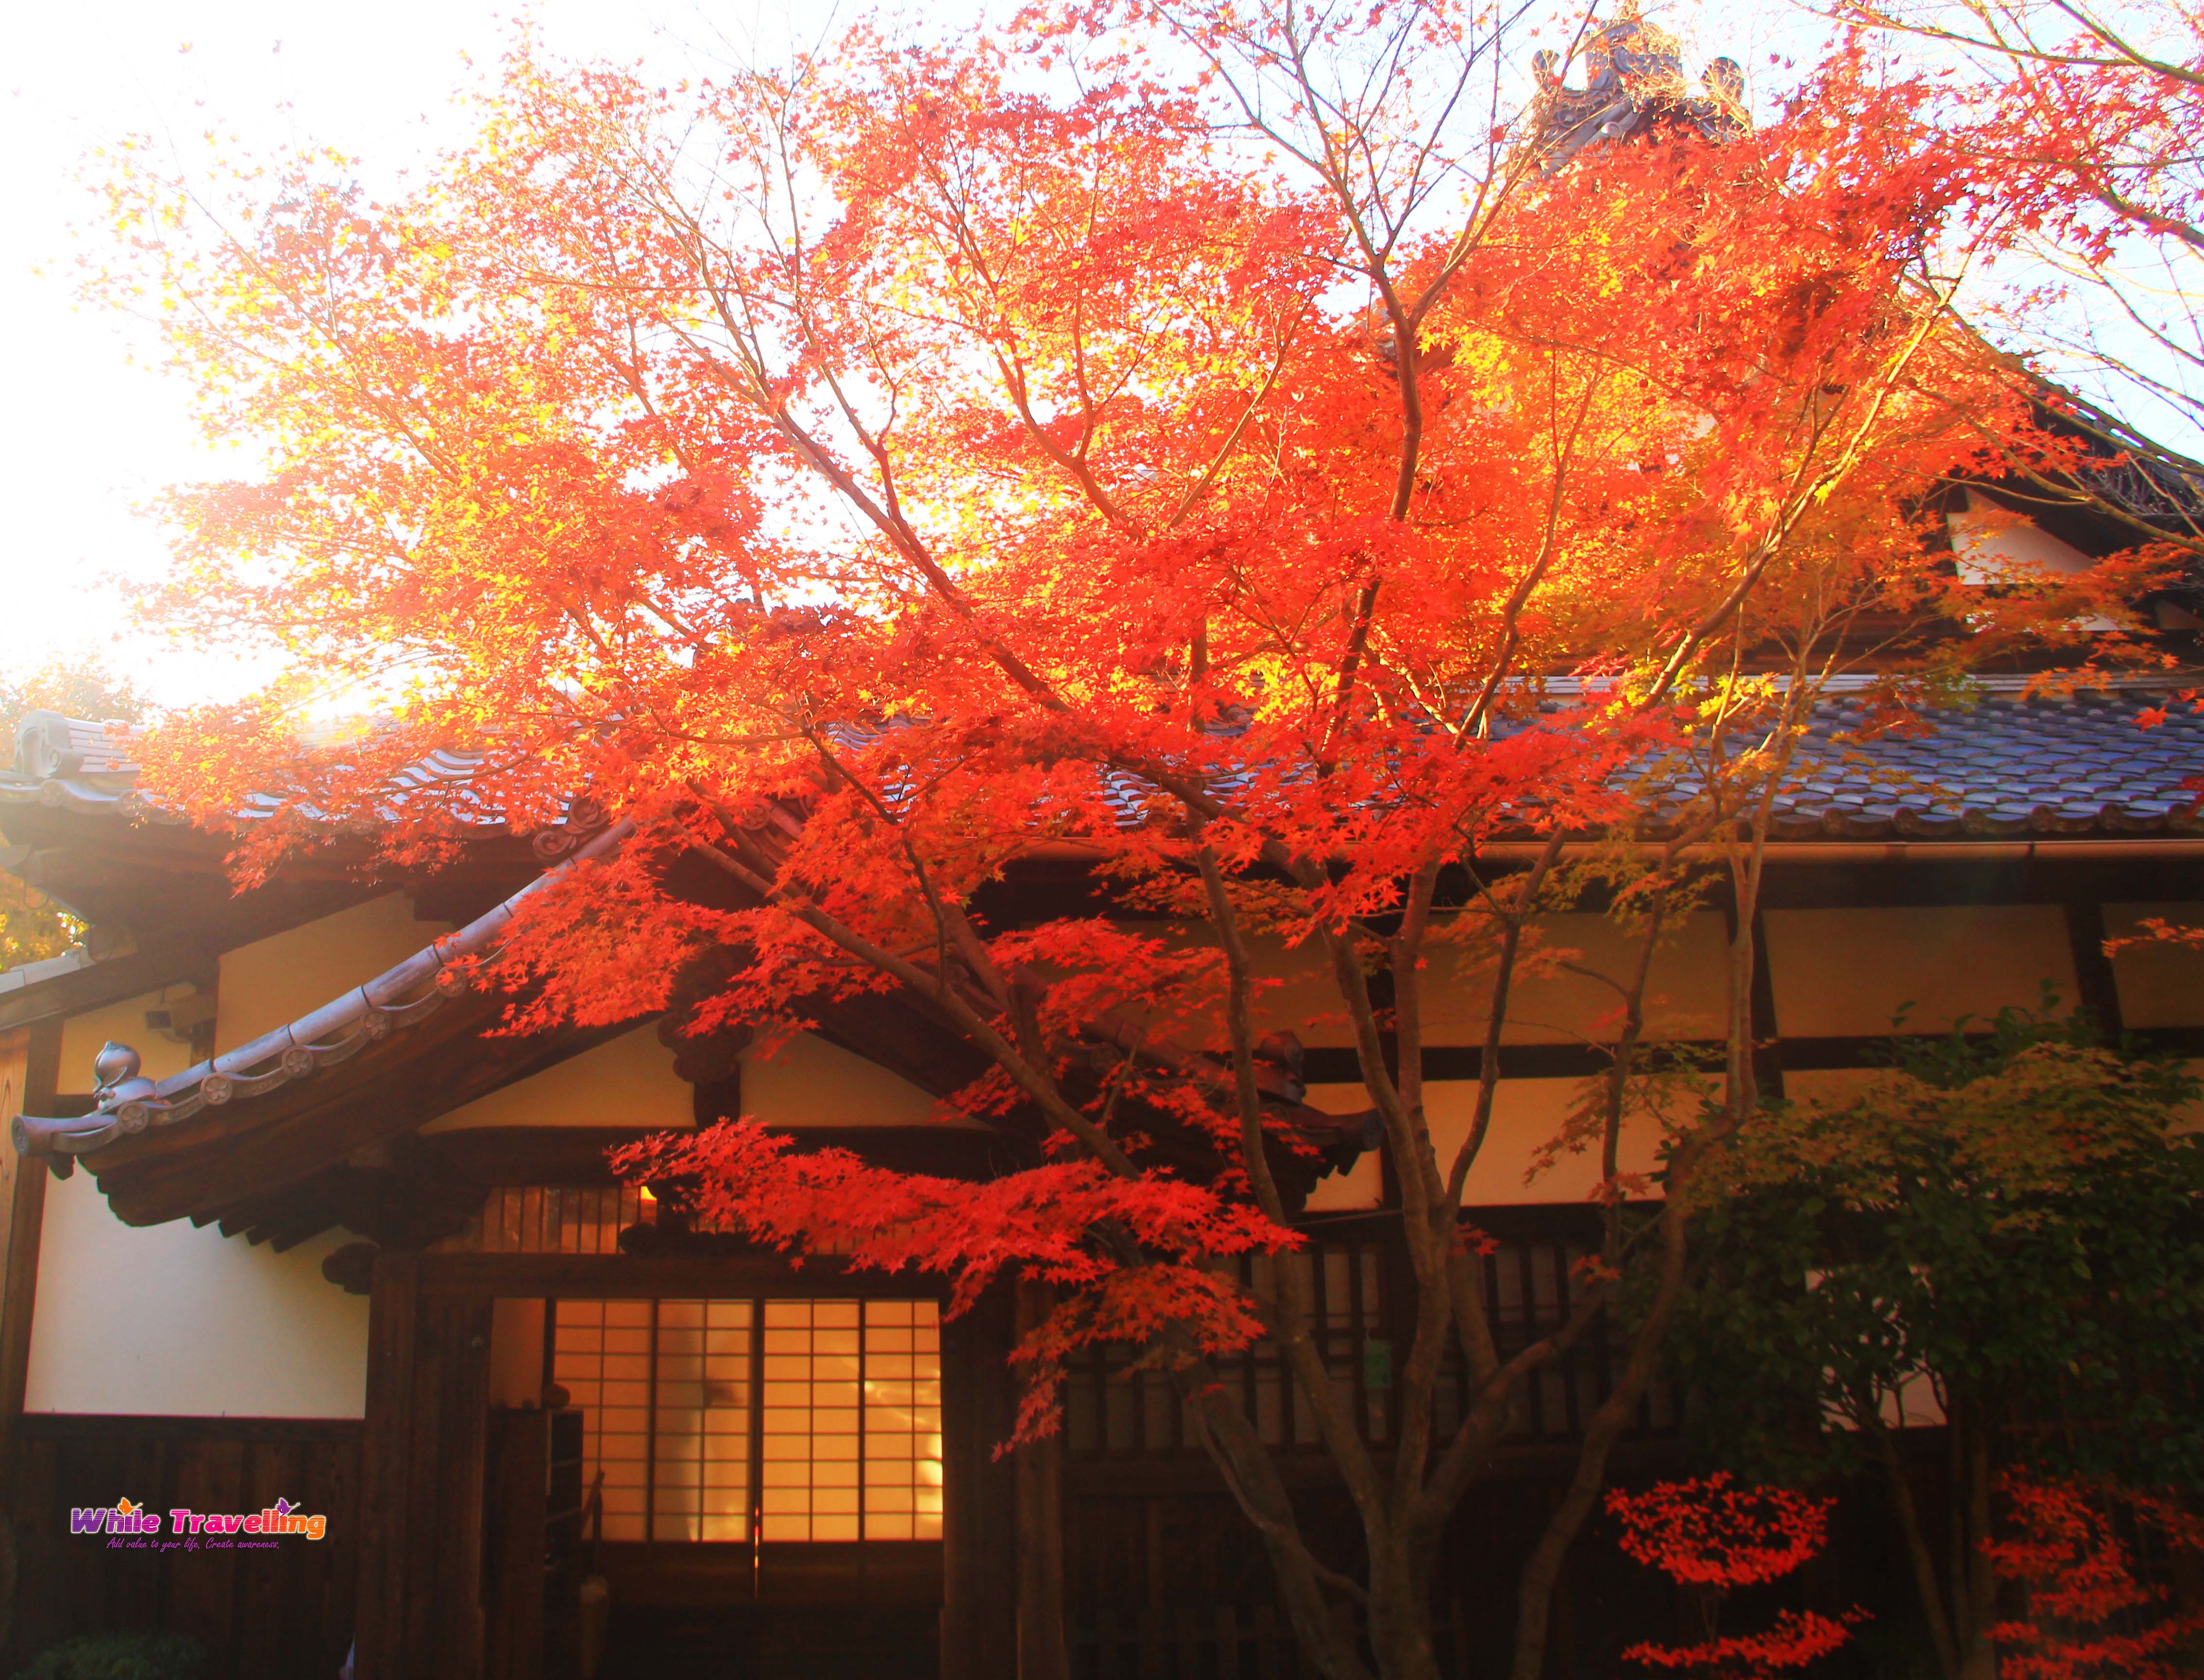 Chasing the autumn colors in Kyoto | While Travelling